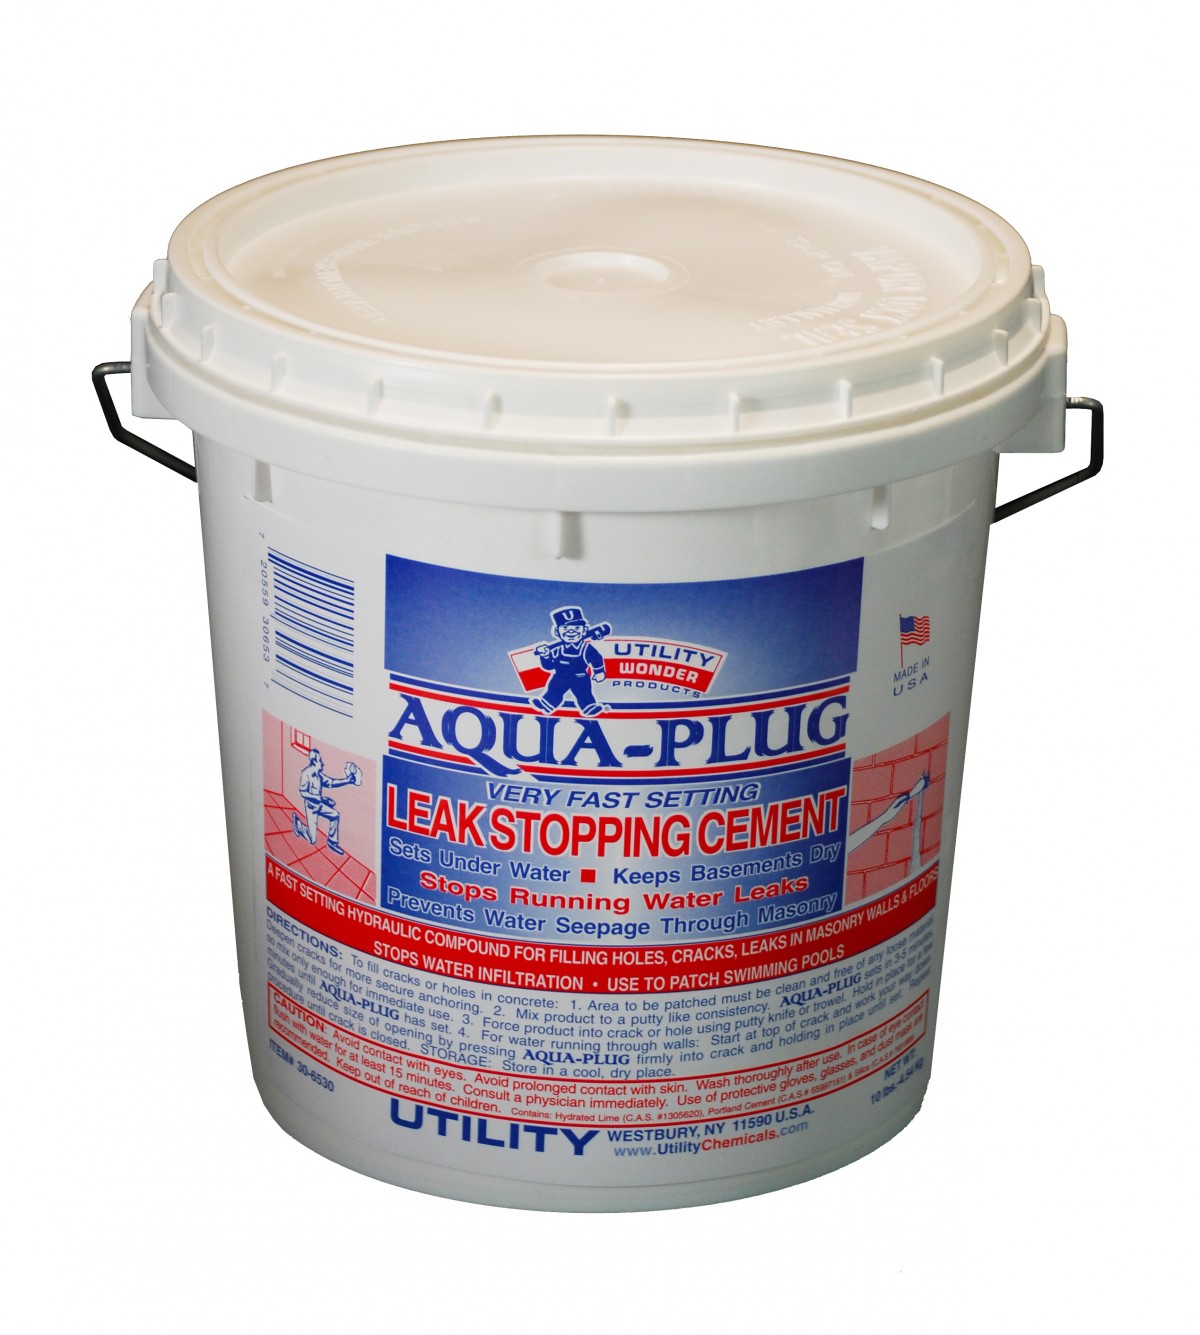 AQUA-PLUG LEAK STOPPING CEMENT - Furnace & Specialty Cements - Oil Heating